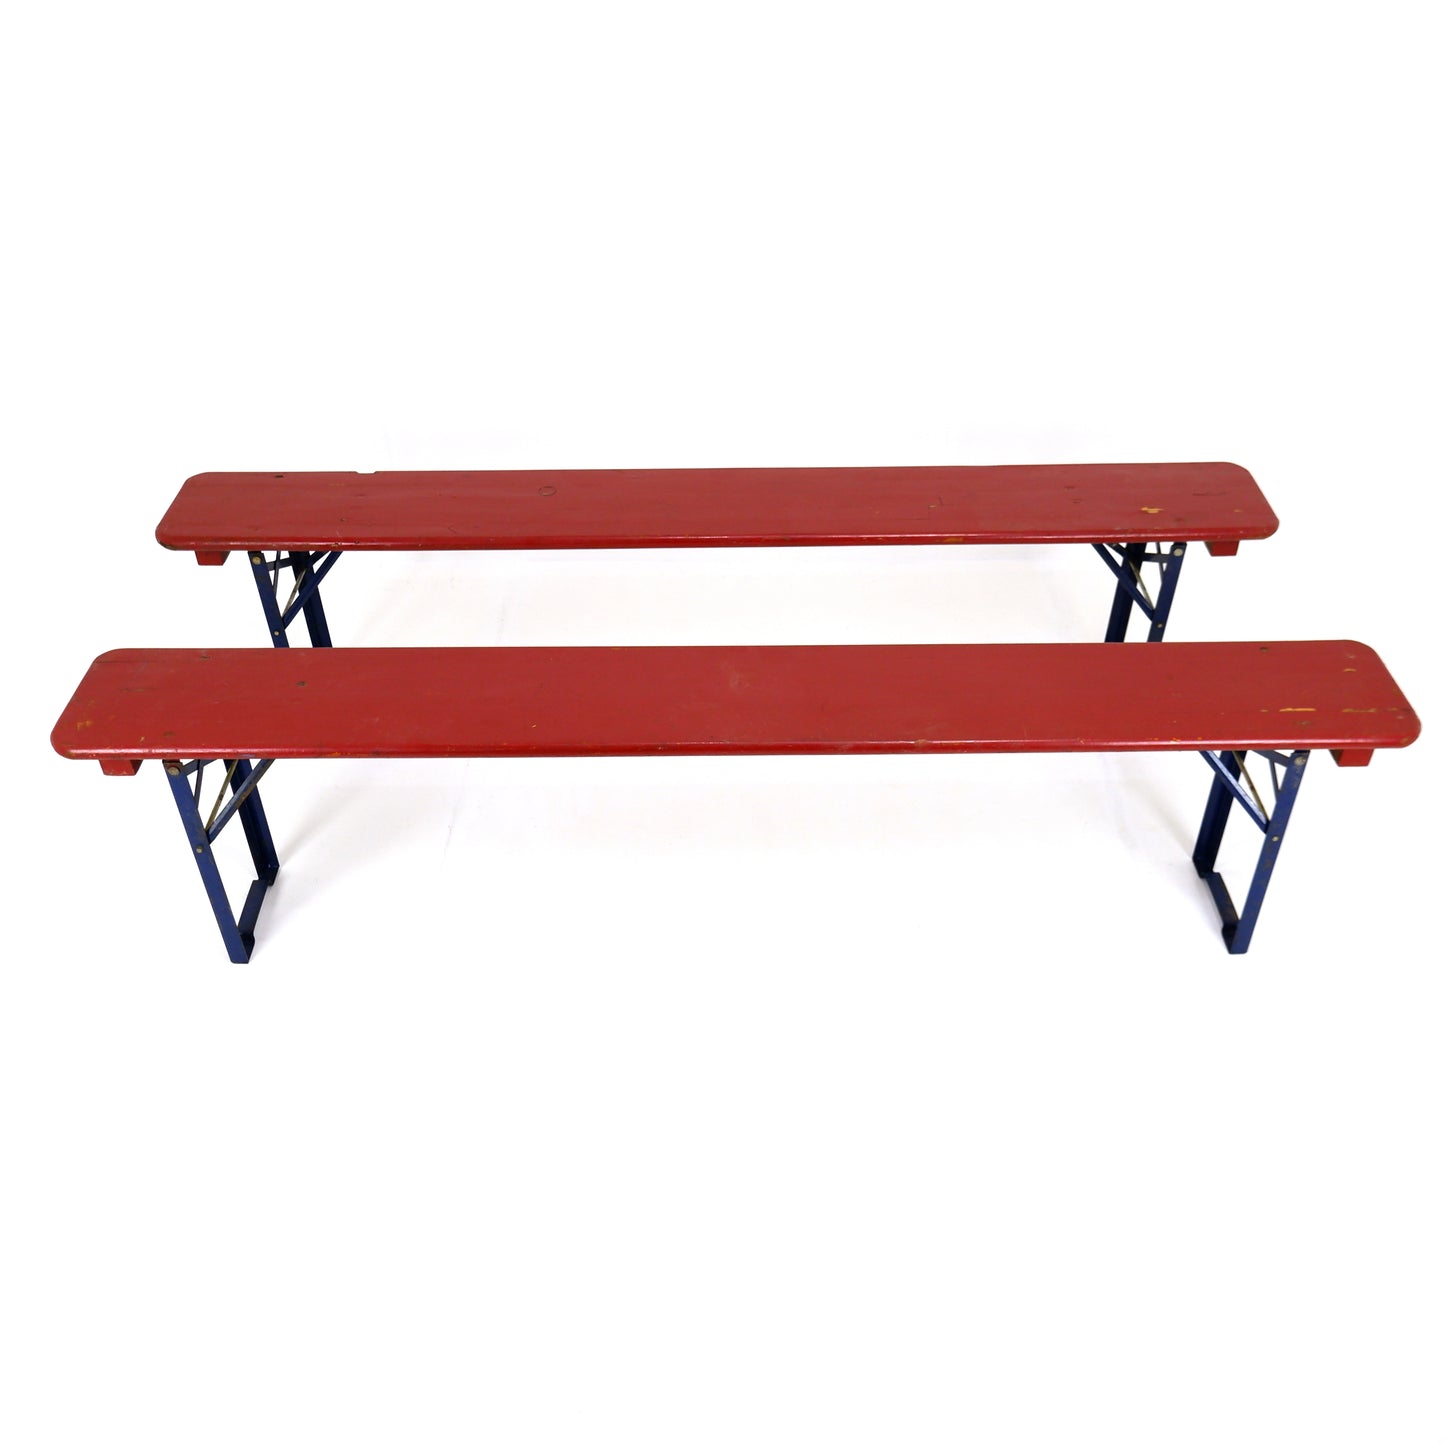 Pair Vintage Industrial German Beer Hall Benches - Folding Trestle Garden Seating